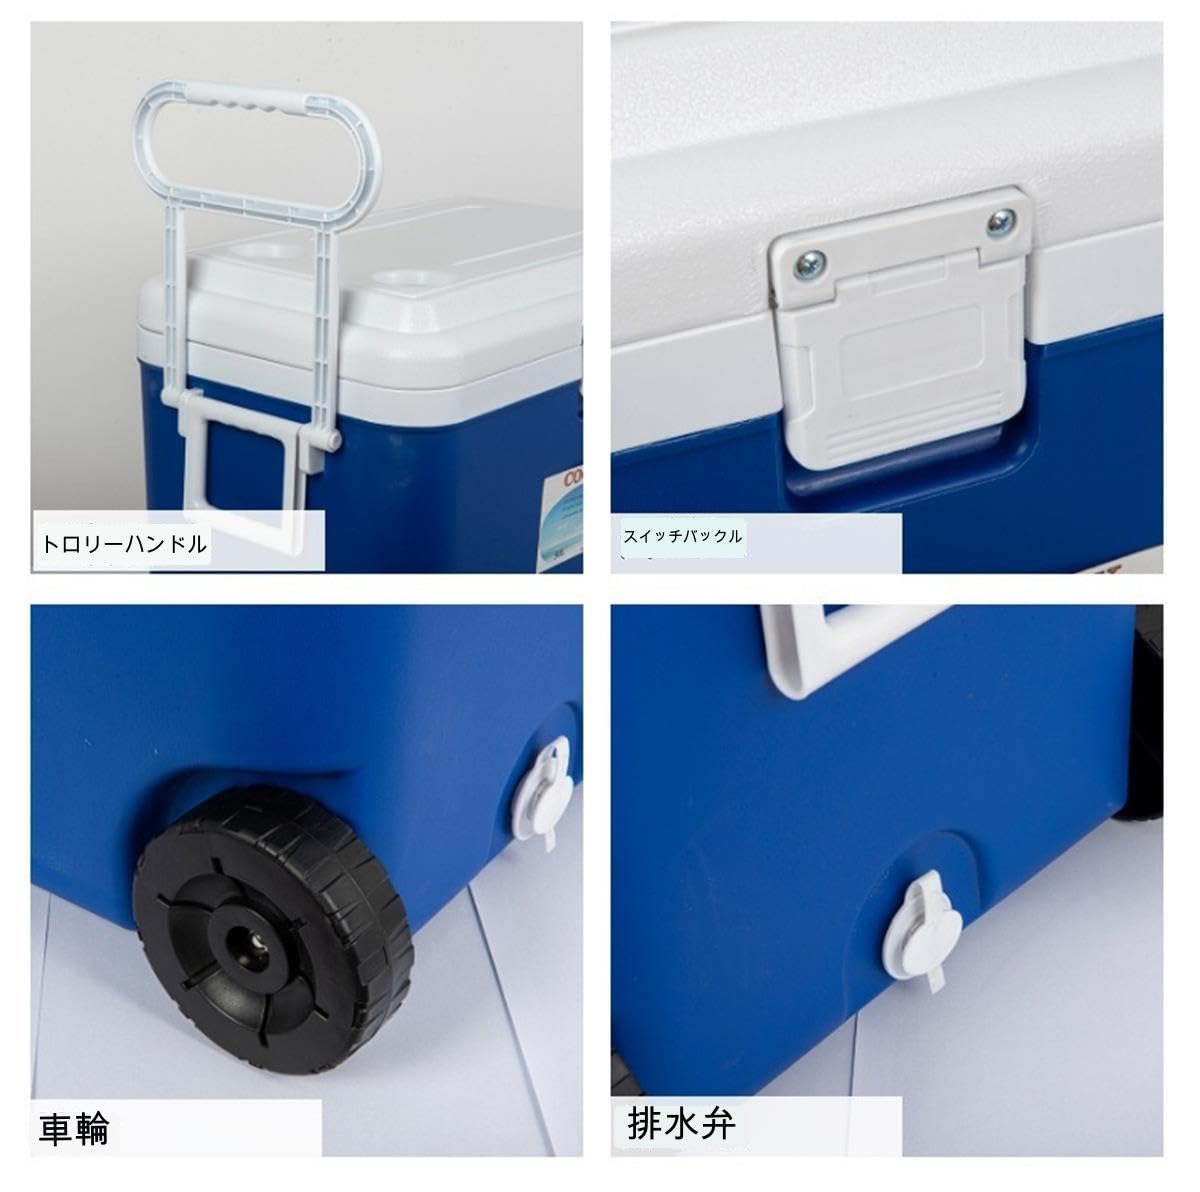  cooler,air conditioner with casters . large outdoors camp in kyu Beta - cooler,air conditioner 50L with casters . cooler-box length hour keep cool heat insulation air-tigh with casters high capacity . repairs easy ko